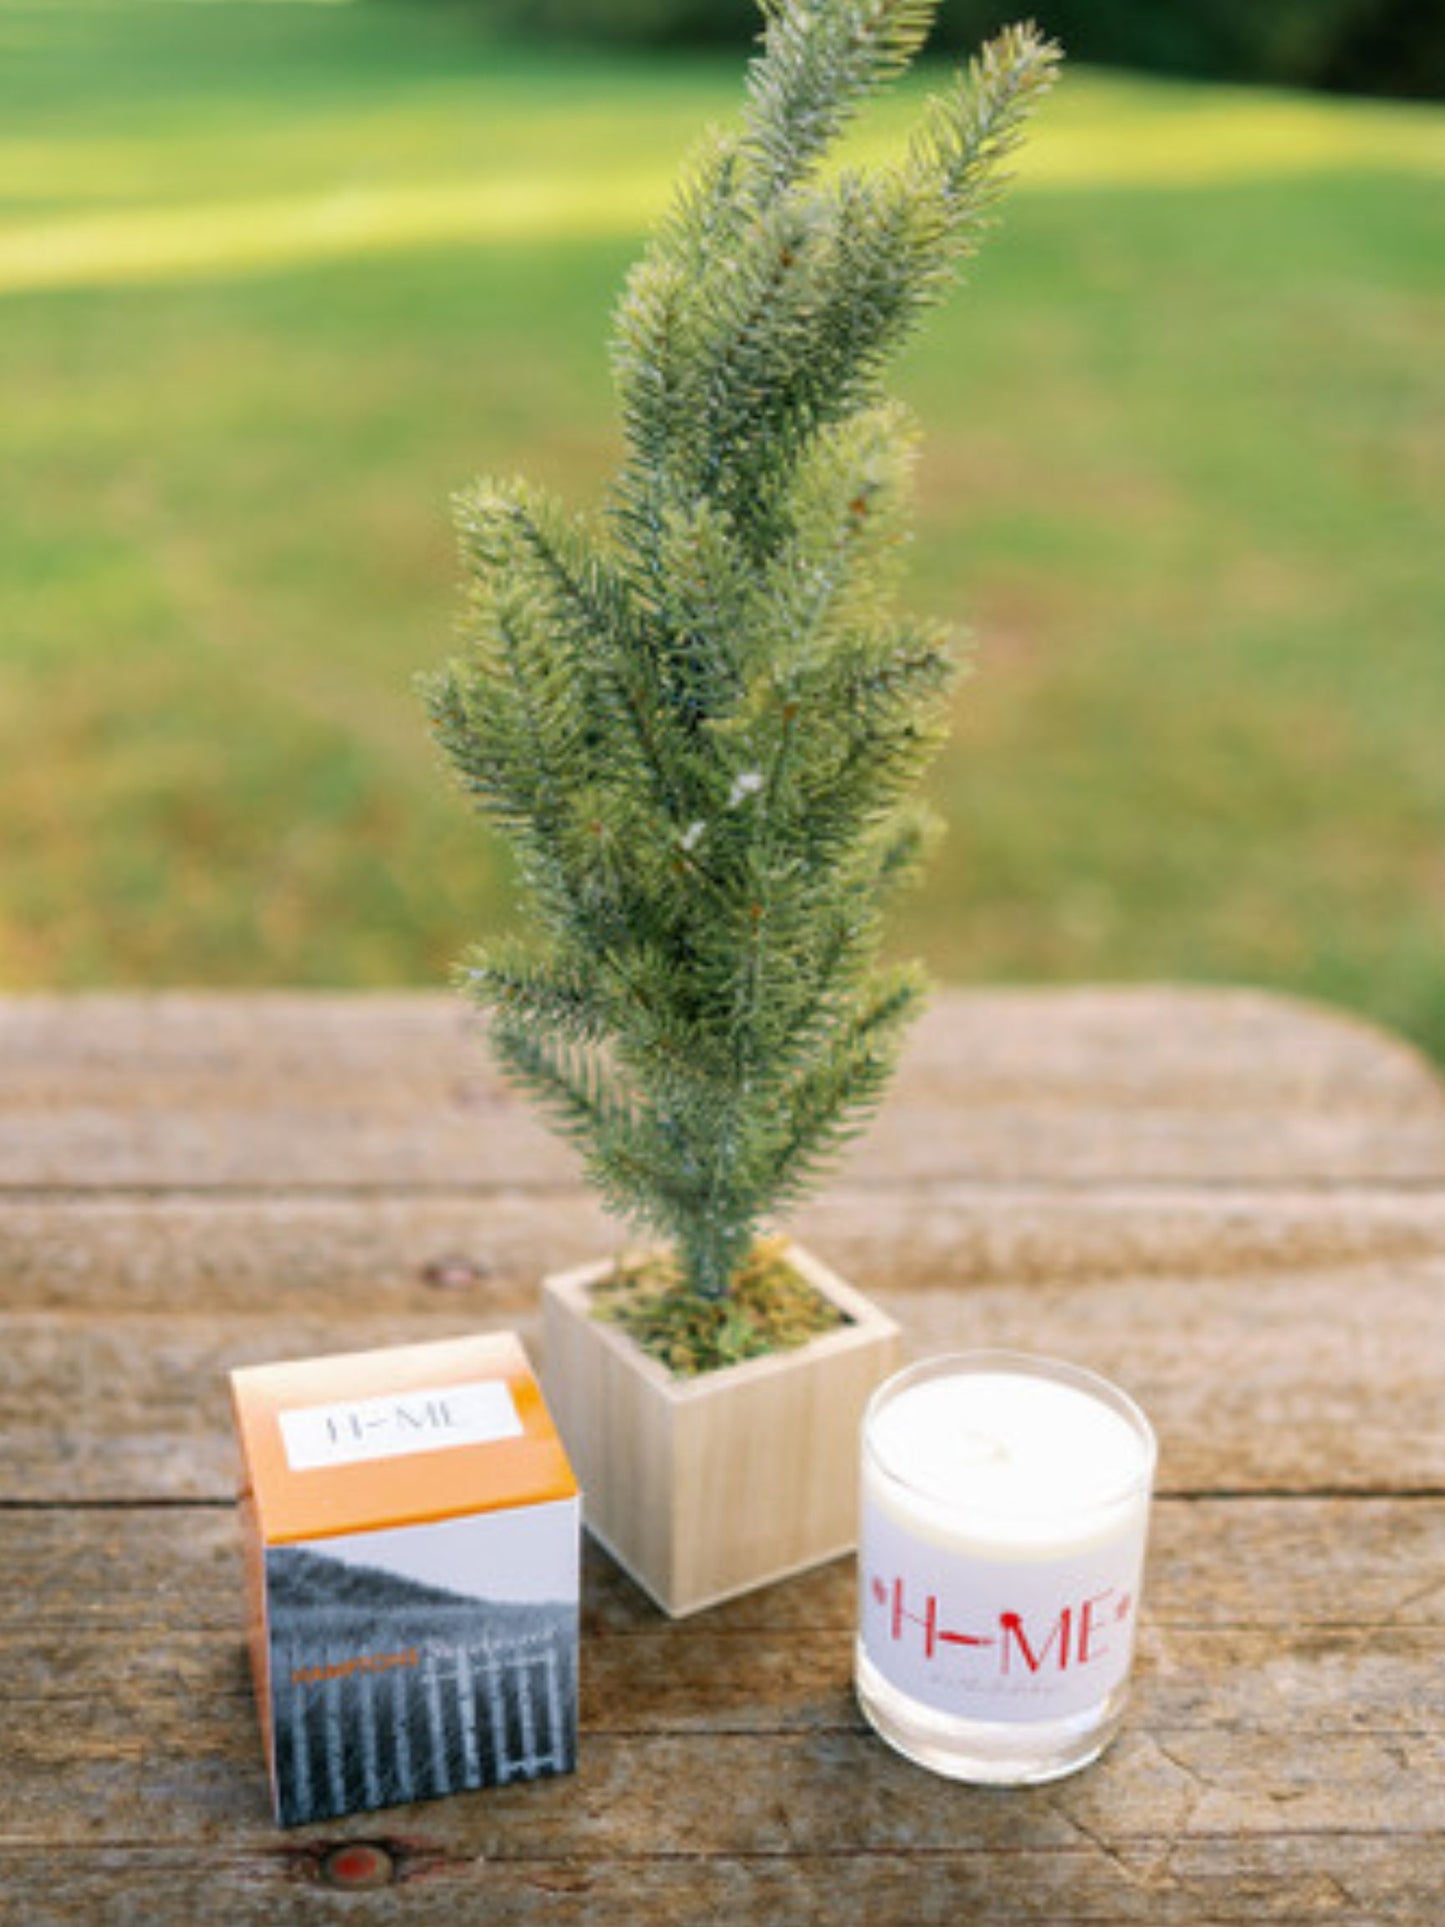 Home For The Holidays x Hamptons HandPoured Candle in Fir Scent